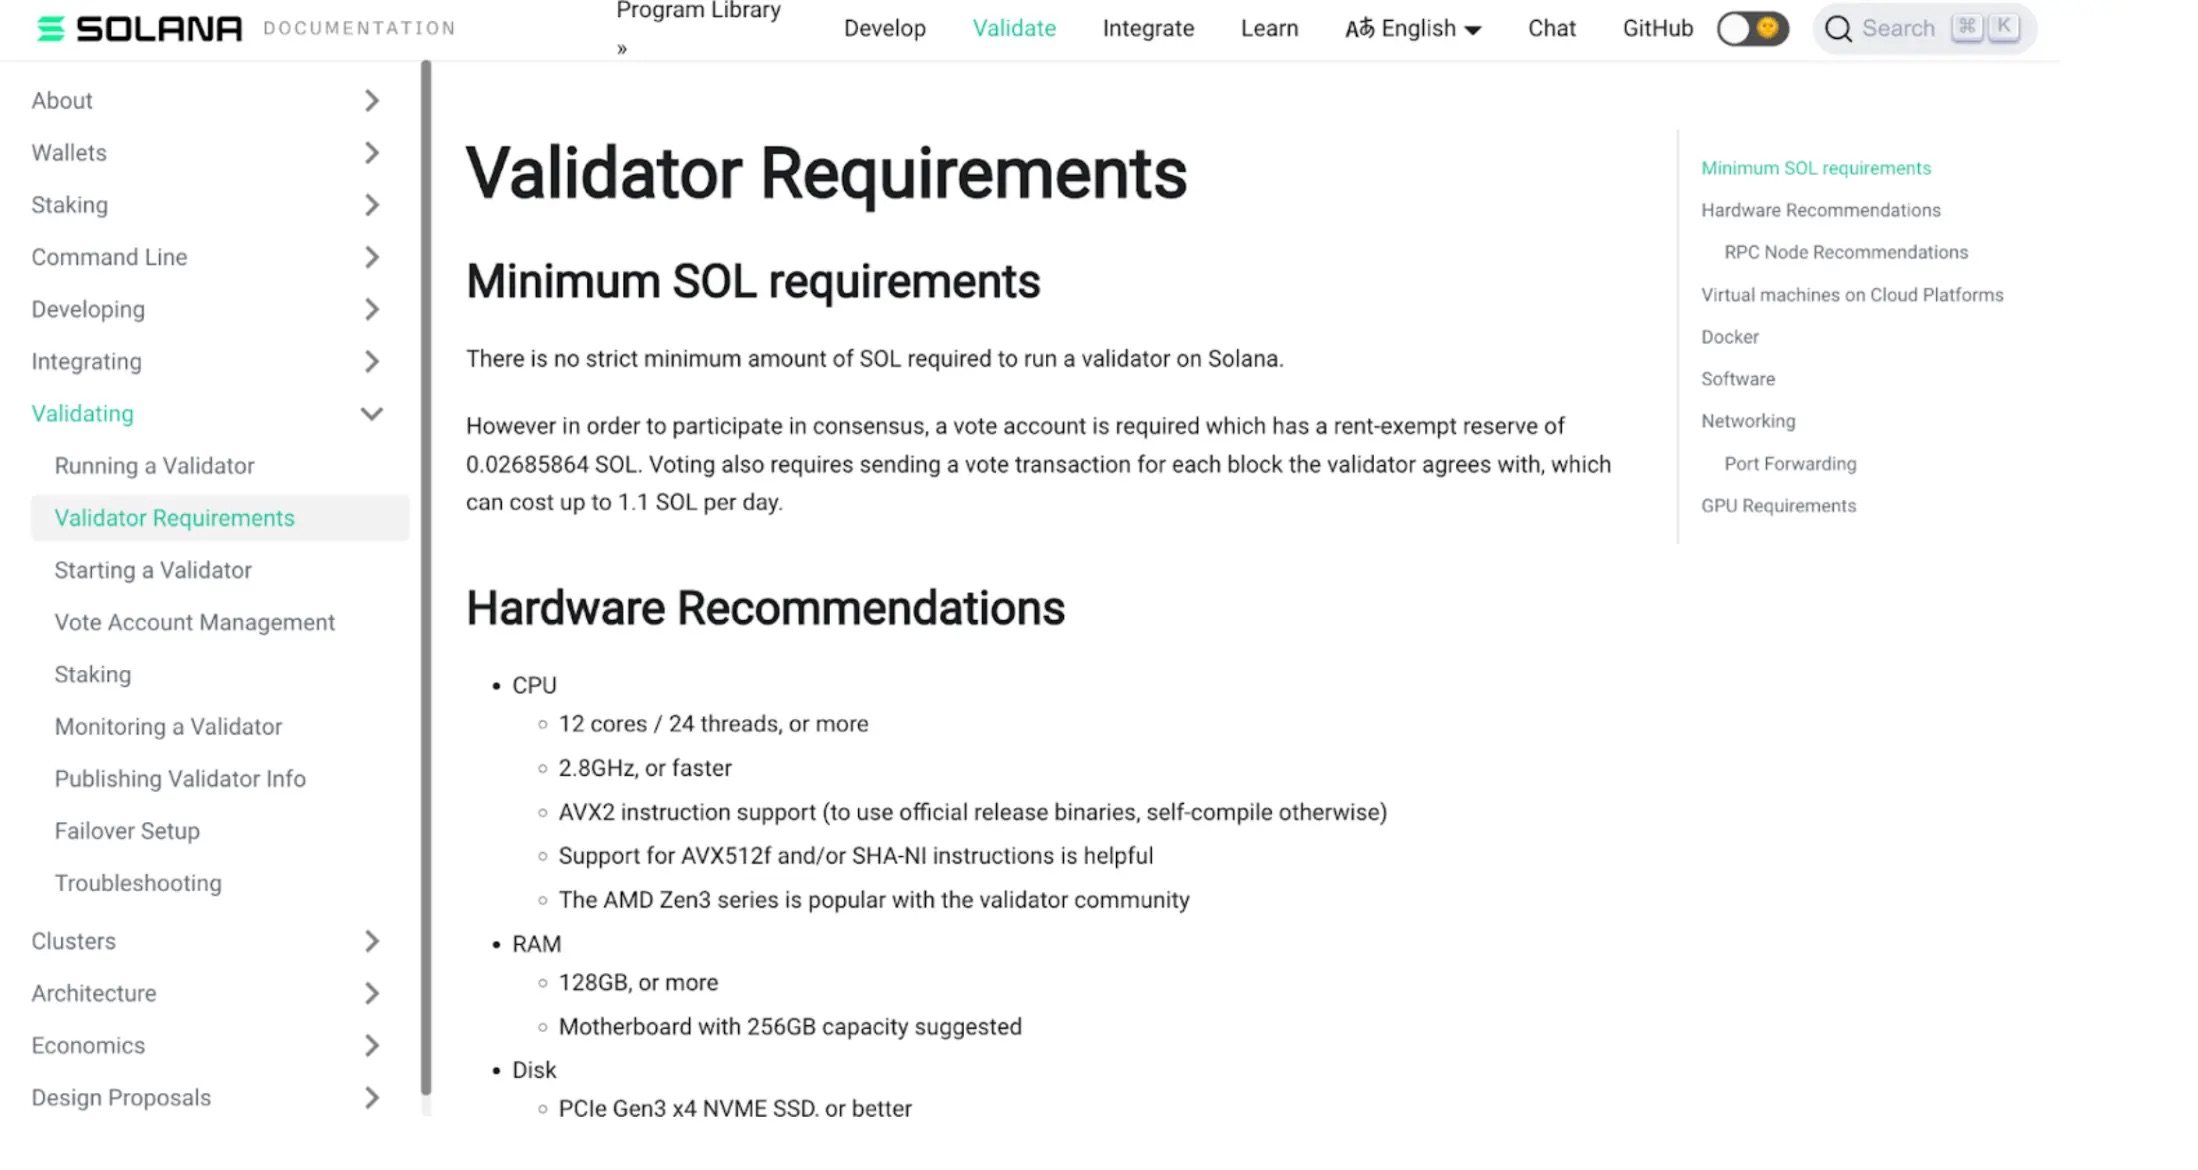 How to stake Solana with your own network validator